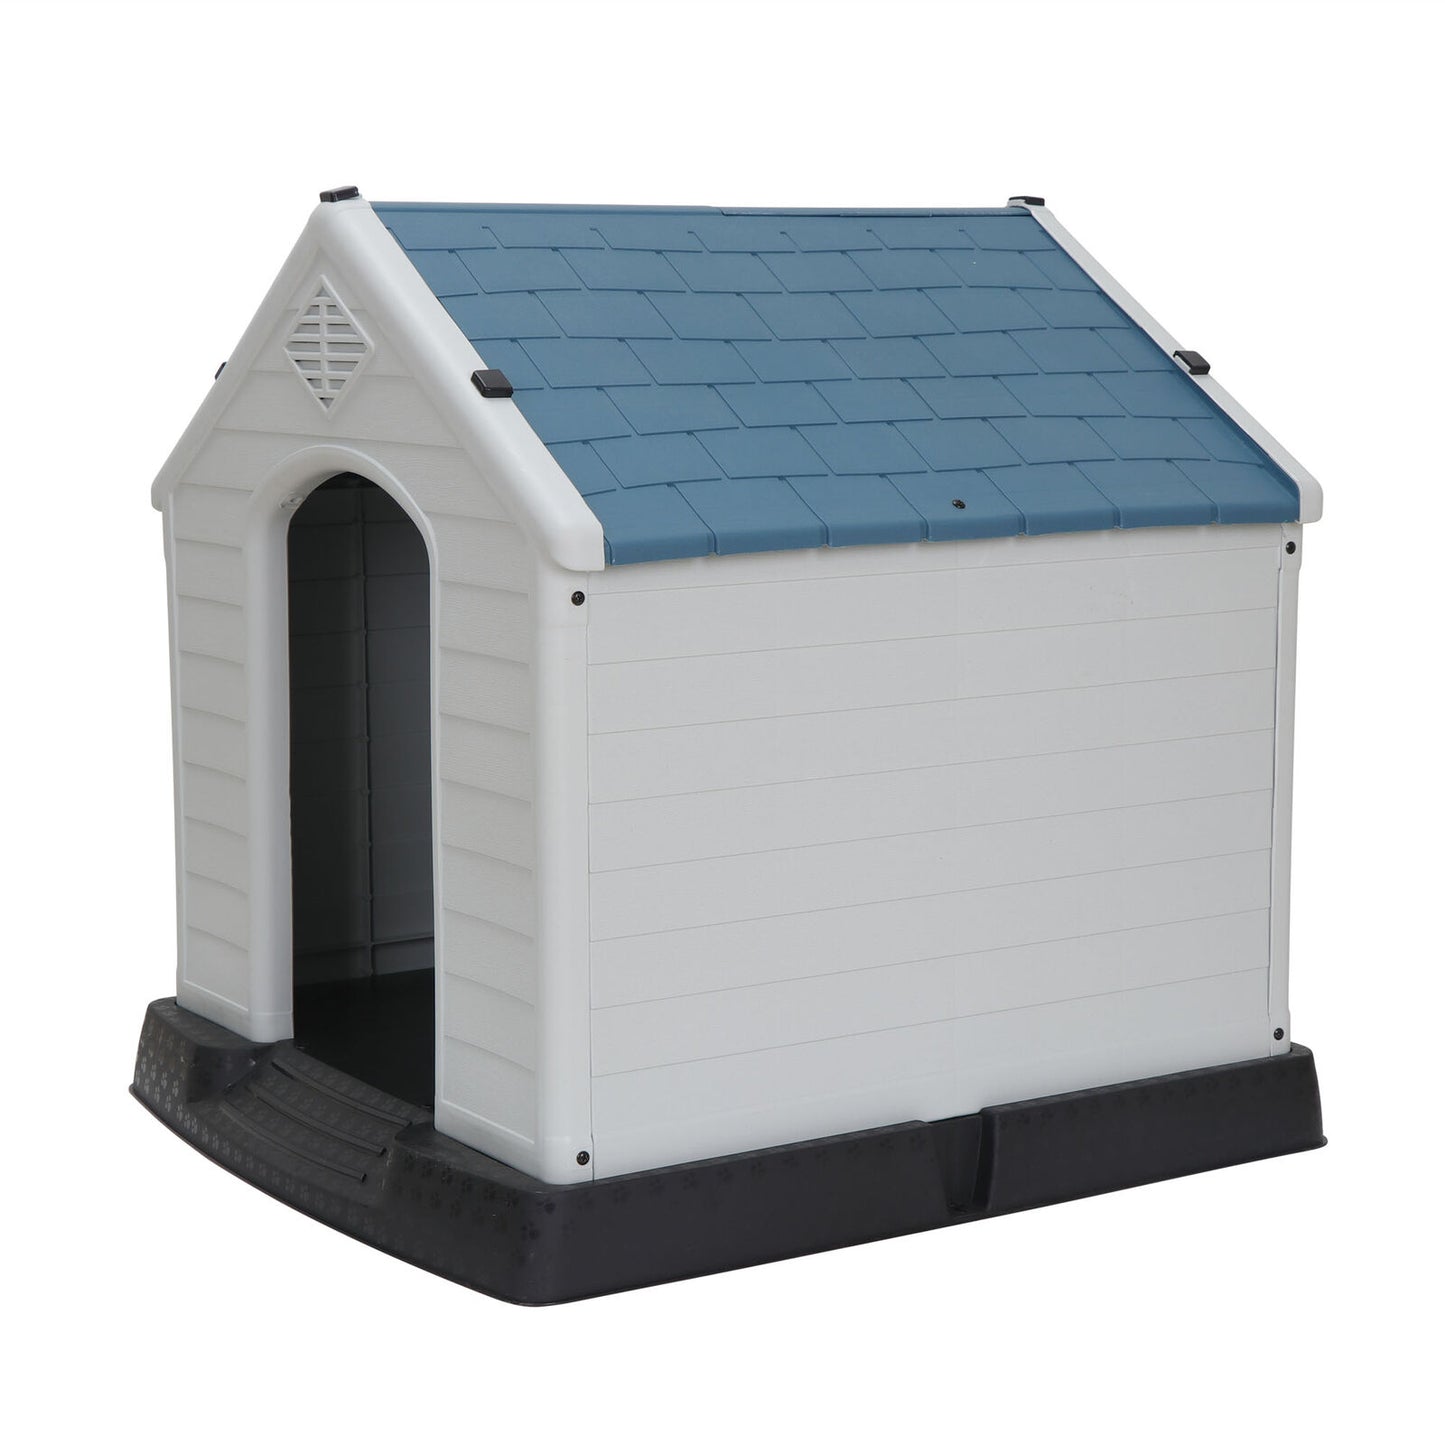 2X Design Dog House Shelter Easy to Assemble Perfect for Backyards All-Weather